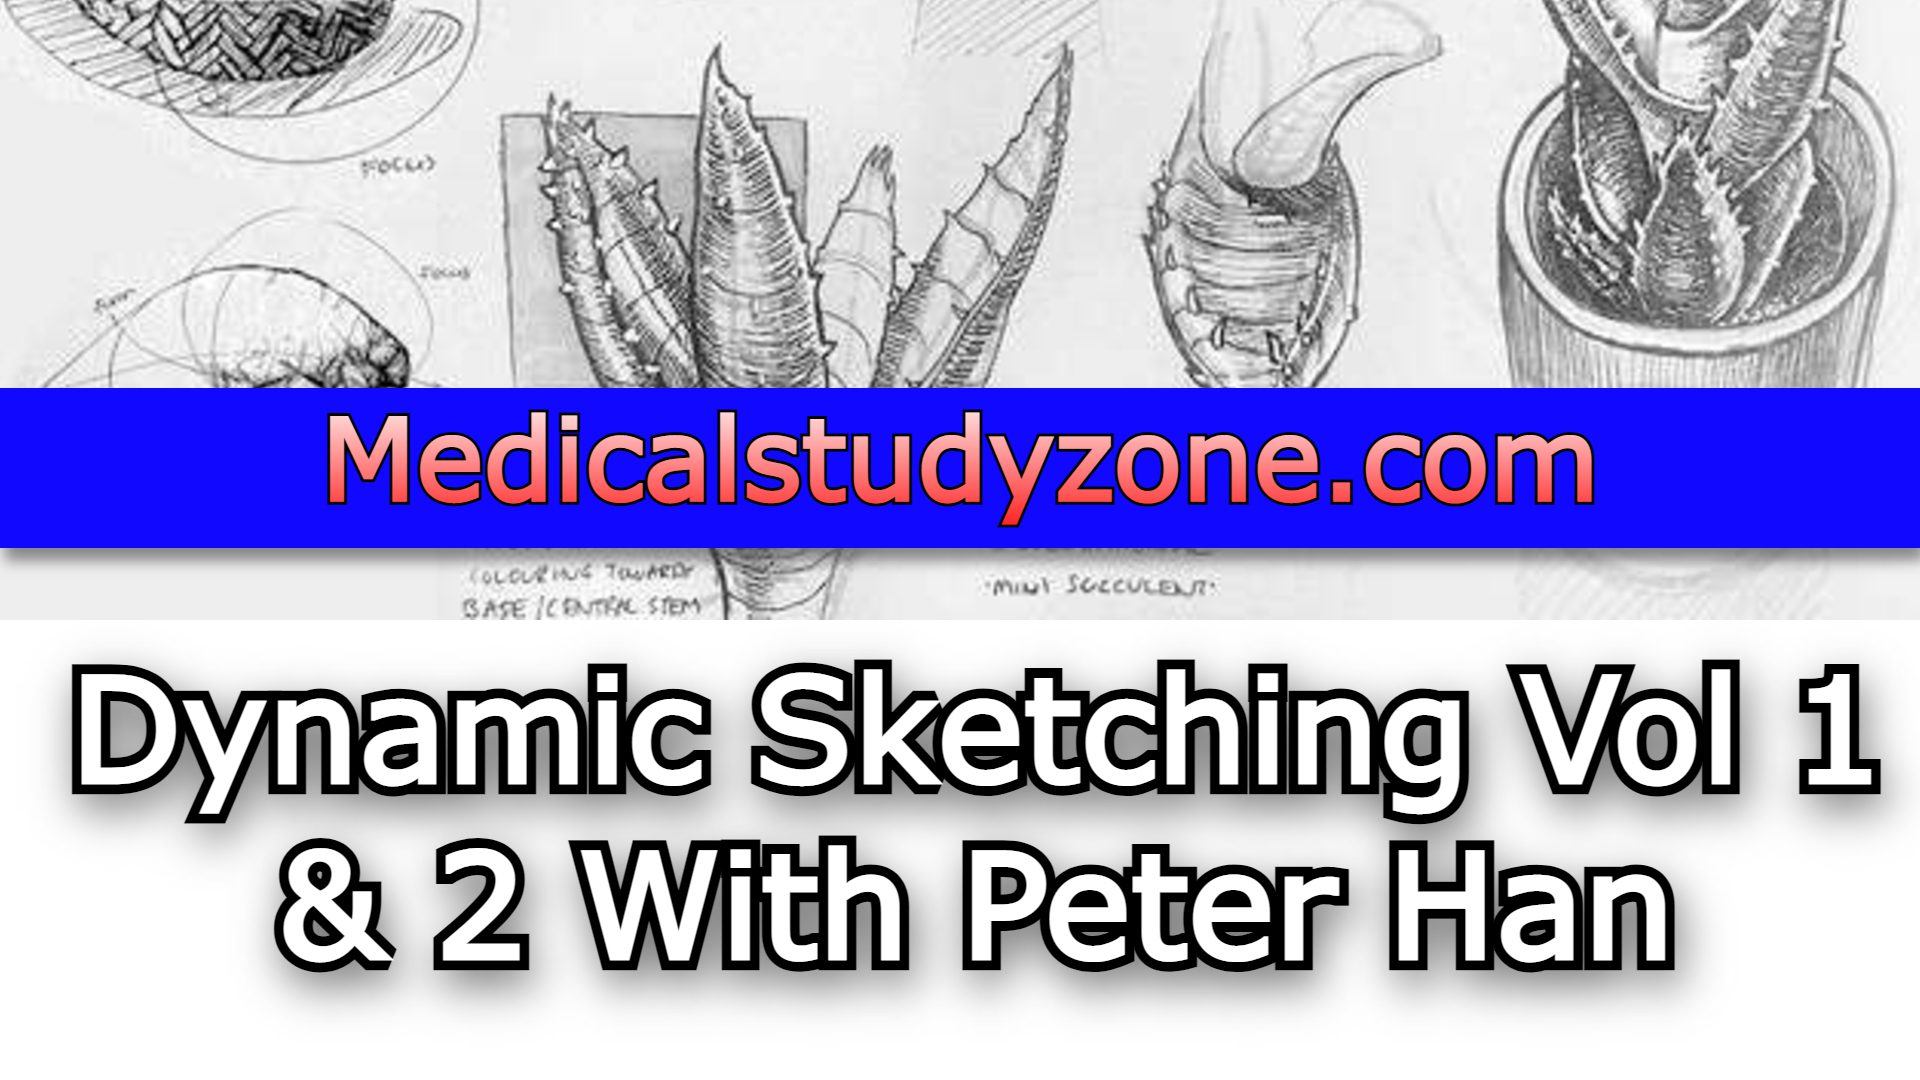 Dynamic Sketching 2021 Vol 1 & 2 With Peter Han Free Download